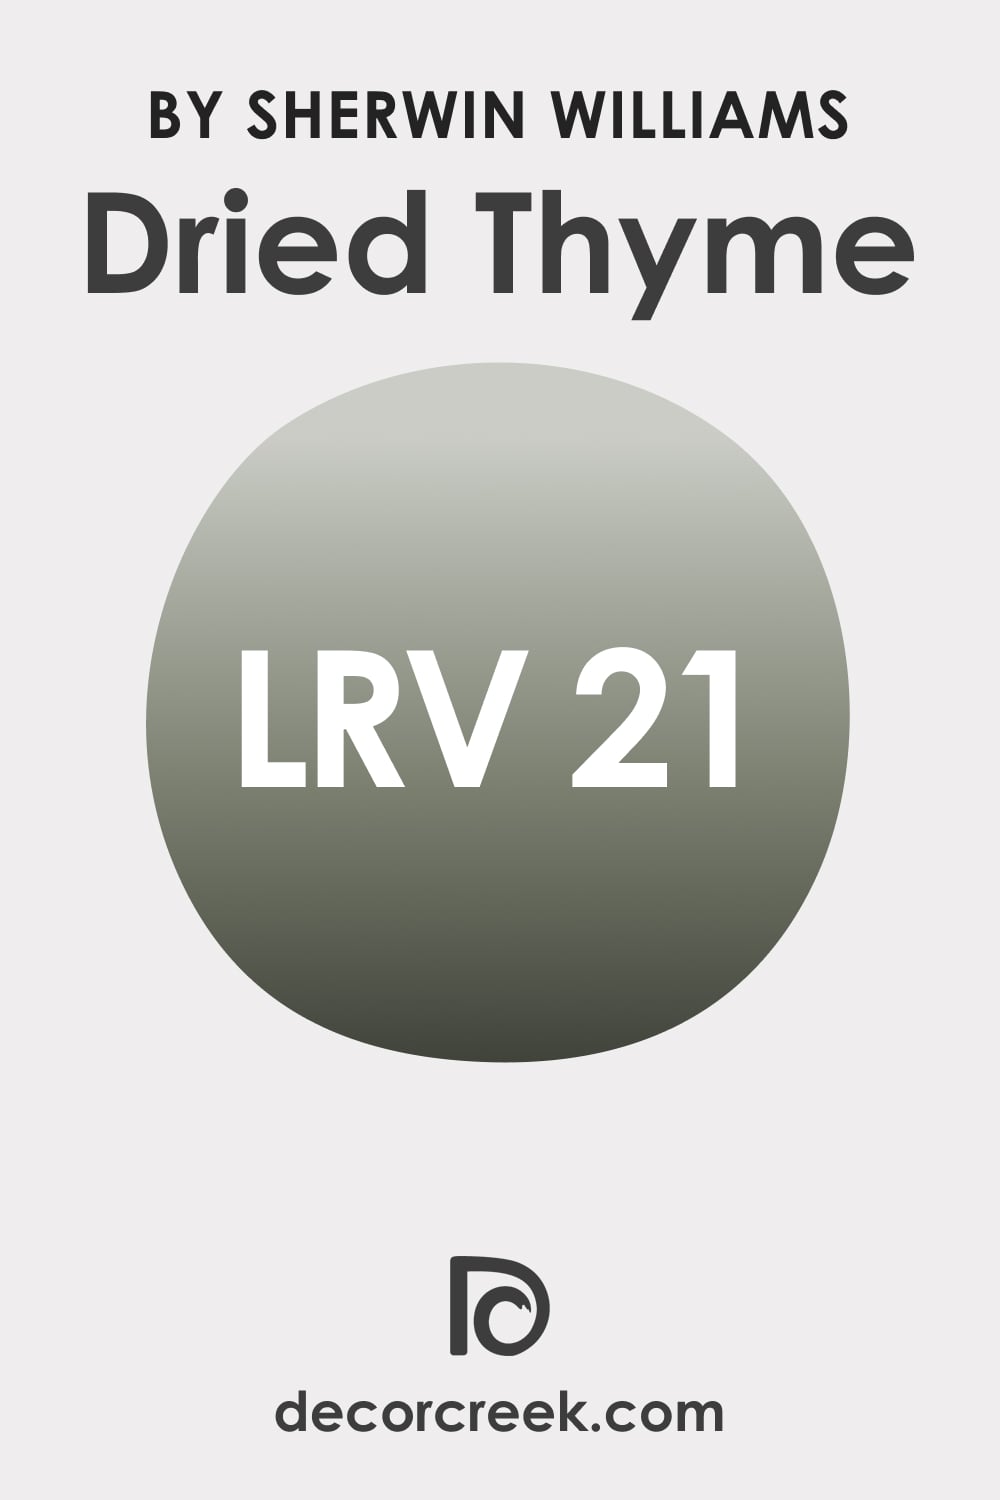 What LRV Dried Thyme SW-6186 Has?